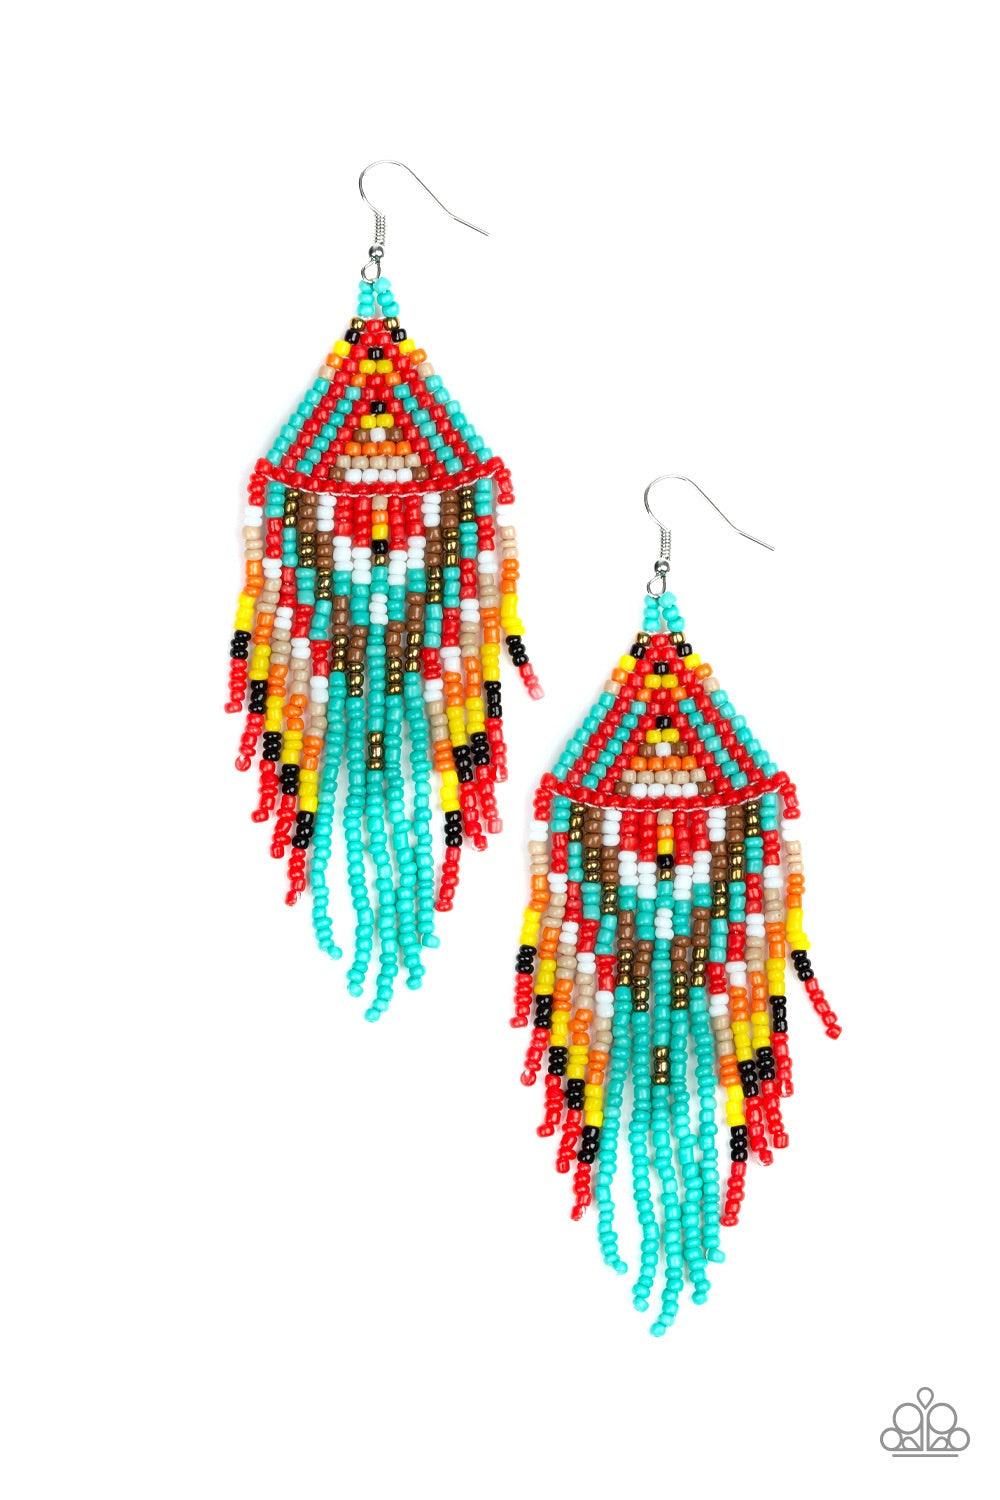 Paparazzi Accessories Boho Blast - Blue Featuring black, blue, brass, brown, orange, white, red, and yellow seed beads, dainty beaded tassels swing from a beaded triangular frame for a colorful tribal look. Earring attaches to a standard fishhook fitting.